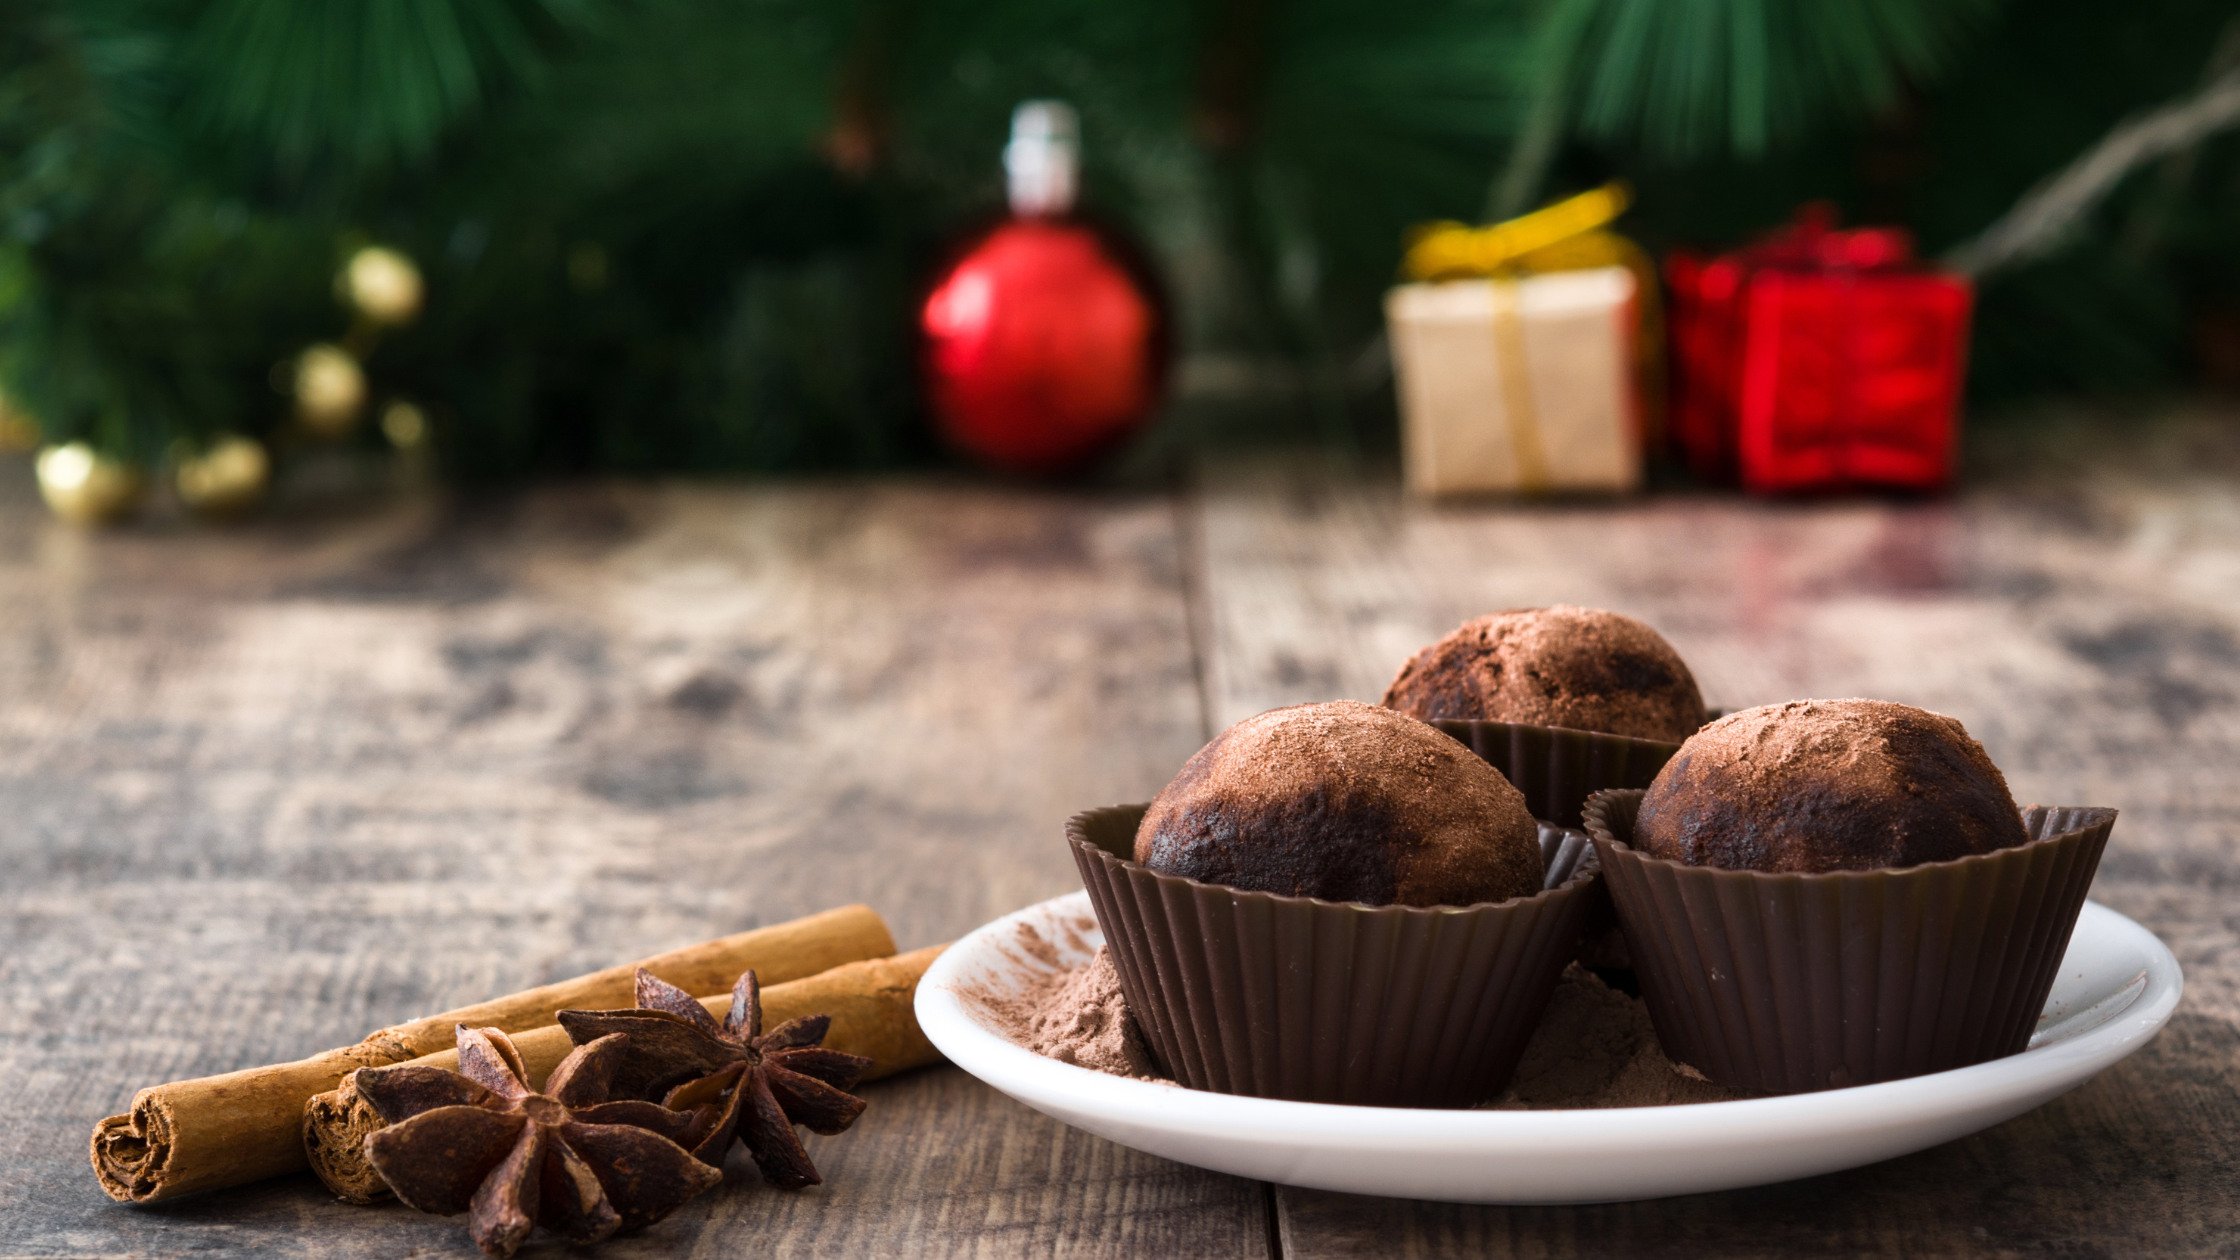 Chocolate Truffles: What Makes Them The Best Dessert Ever?